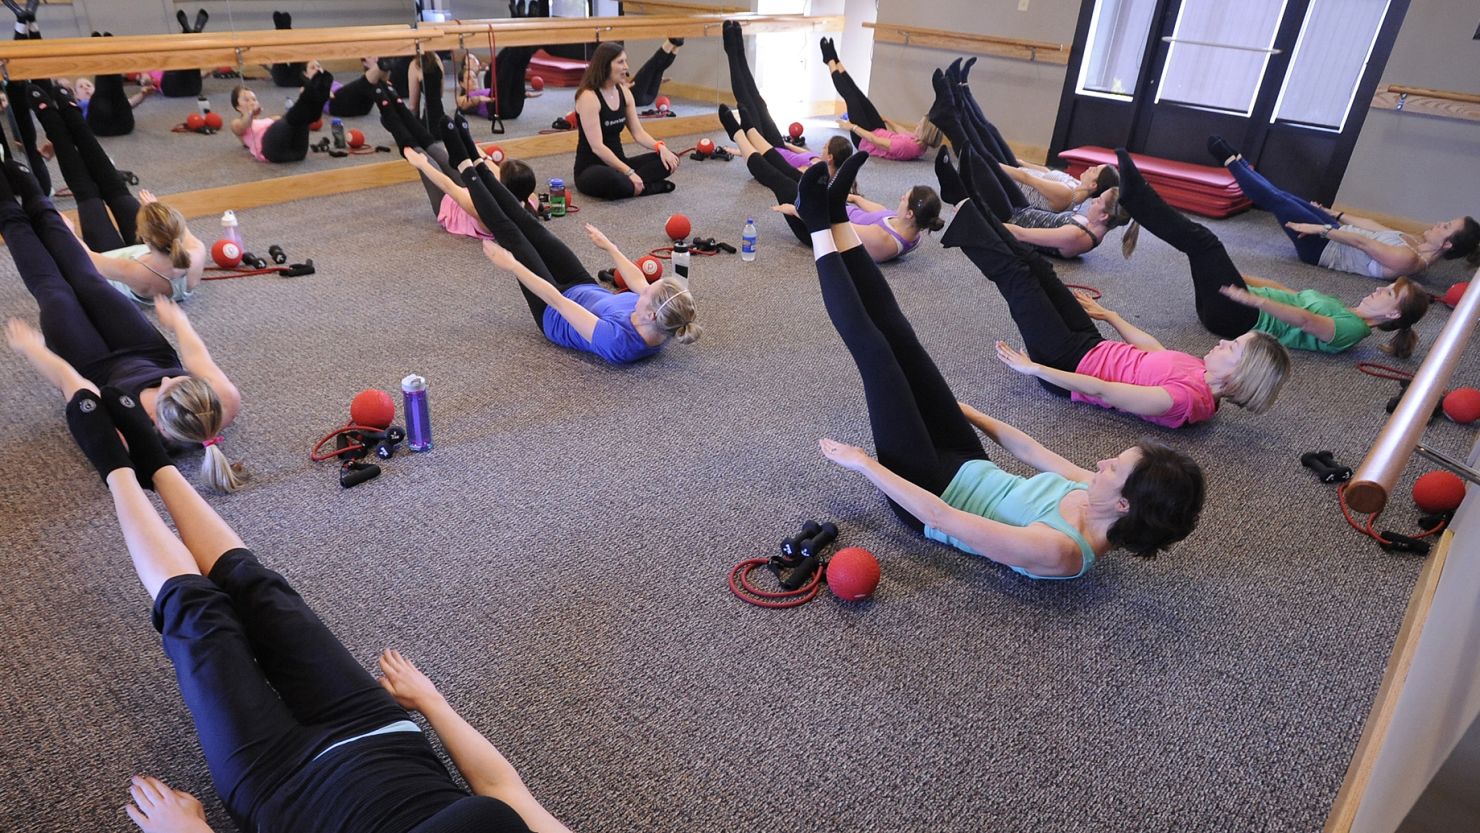 The sexual origins of the popular barre workout